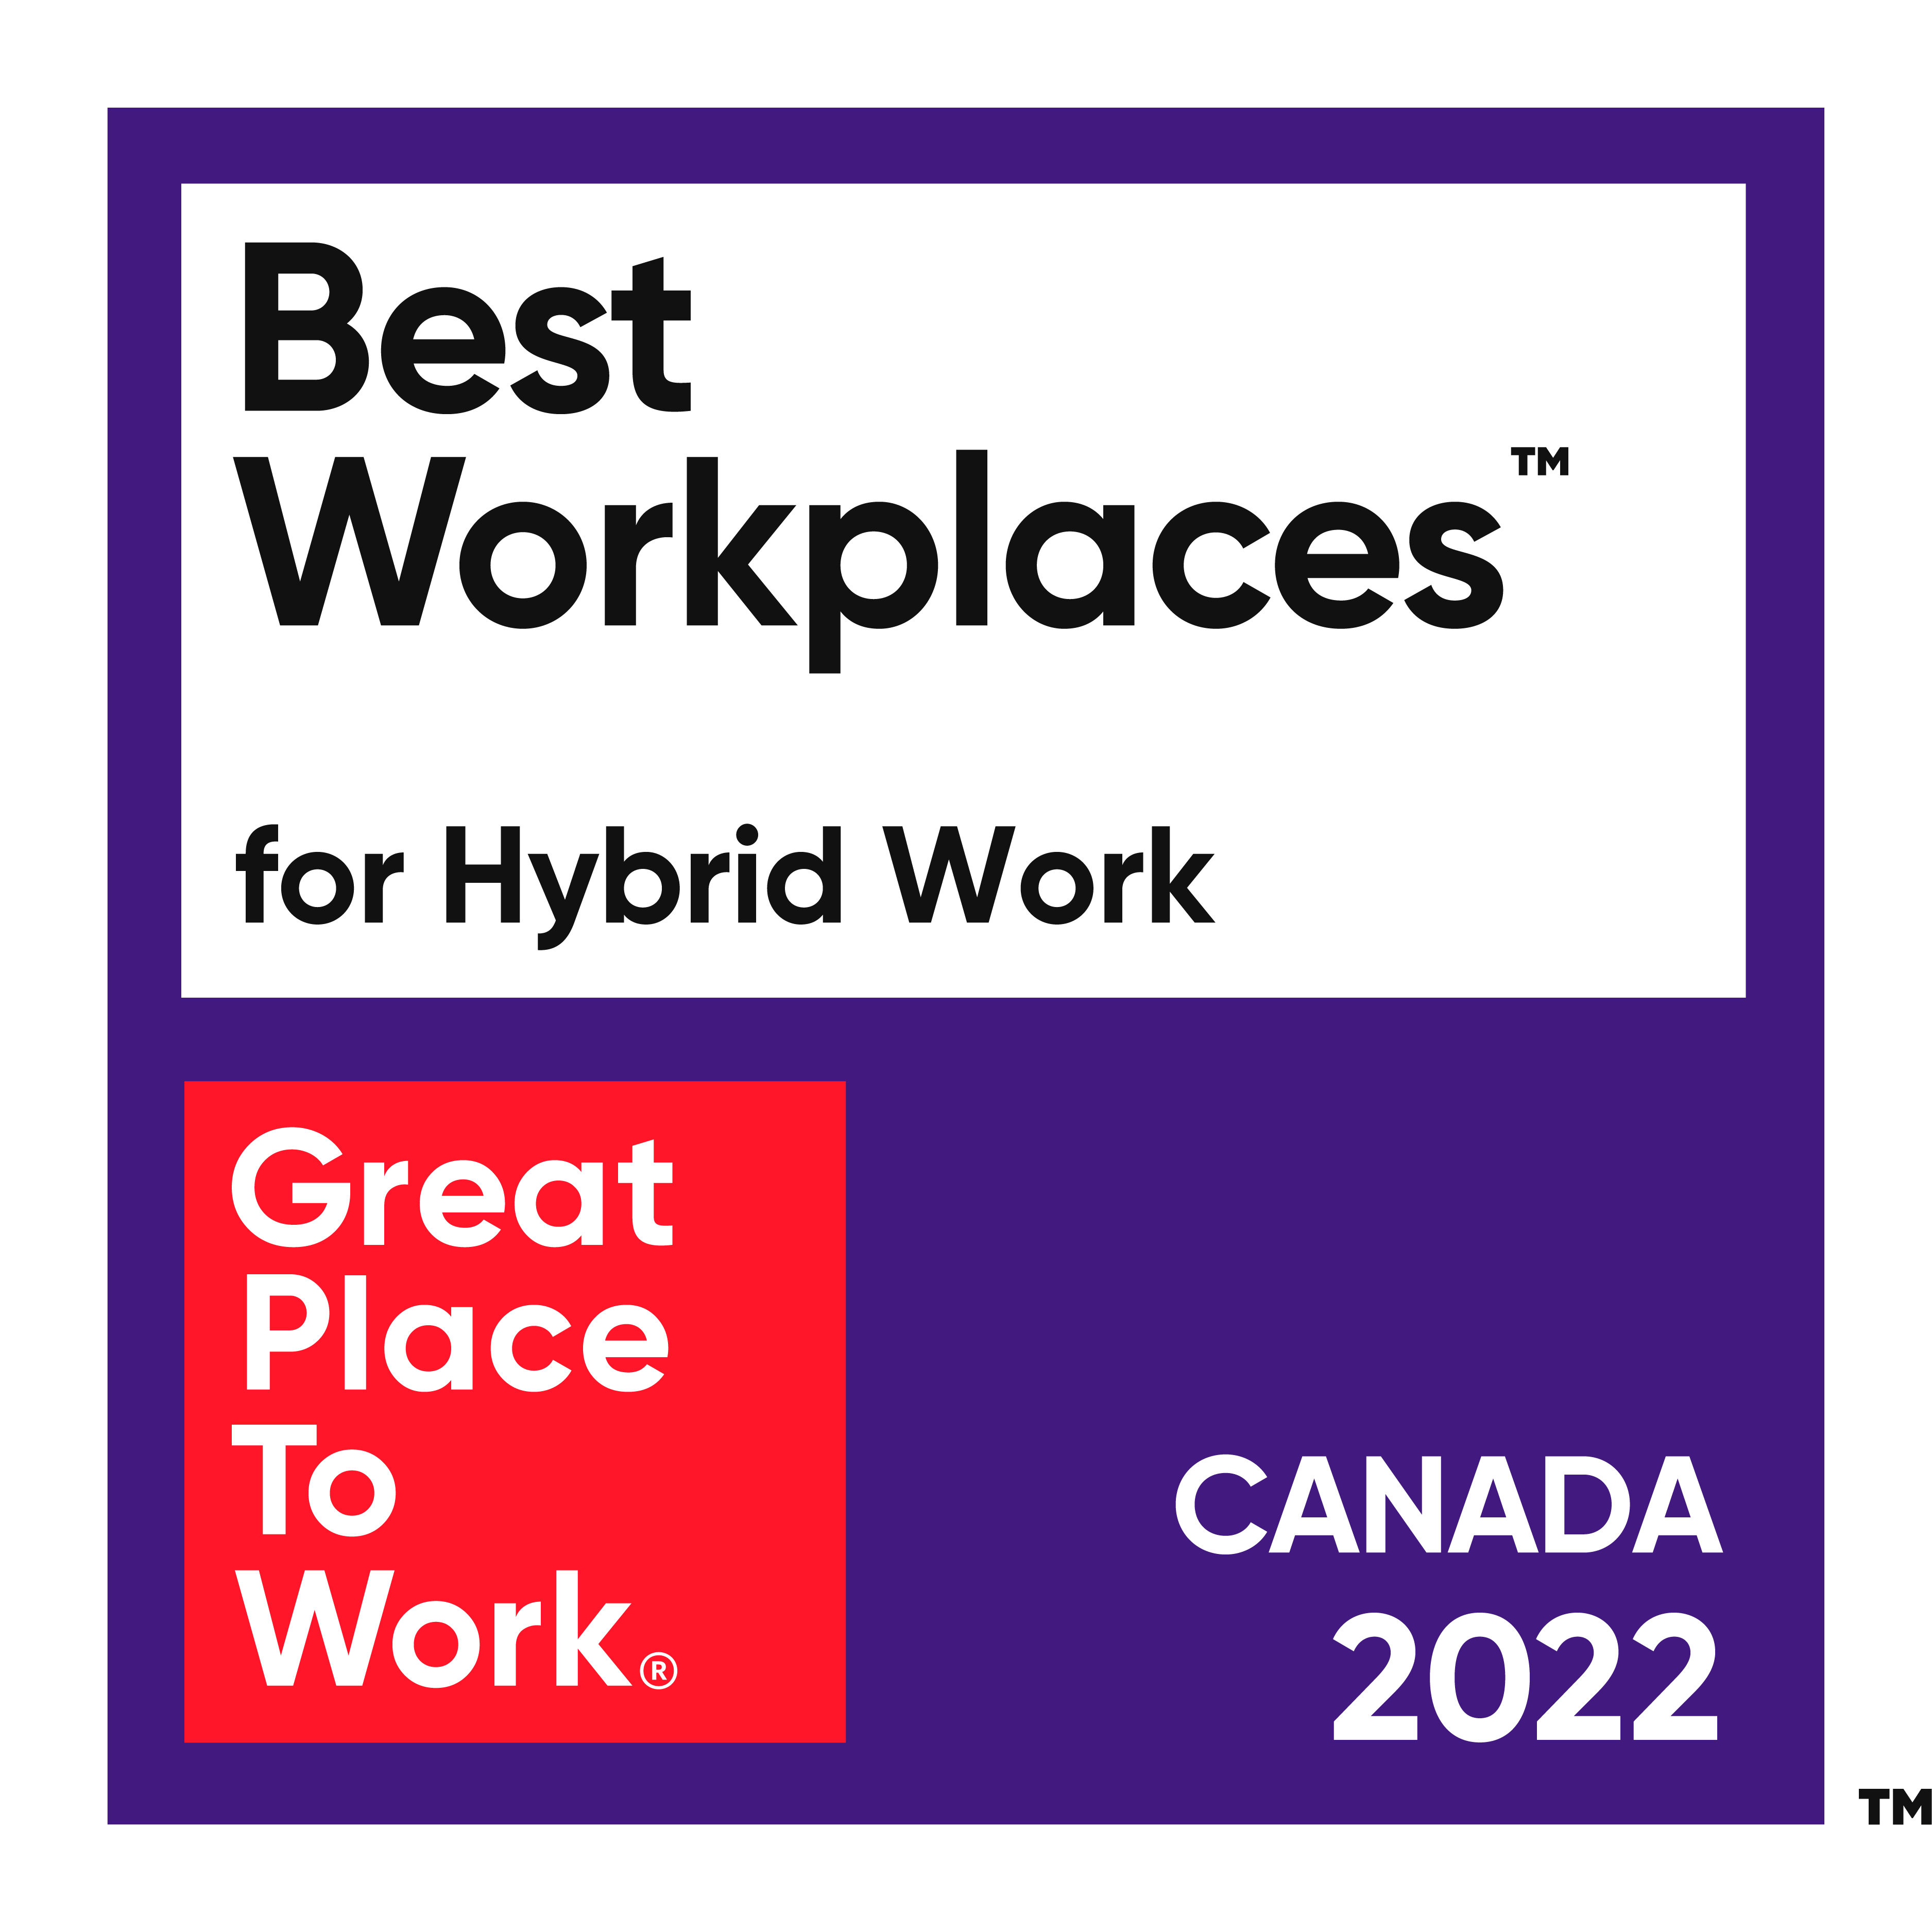 Best Workplaces for Hybrid Work Canada 2022